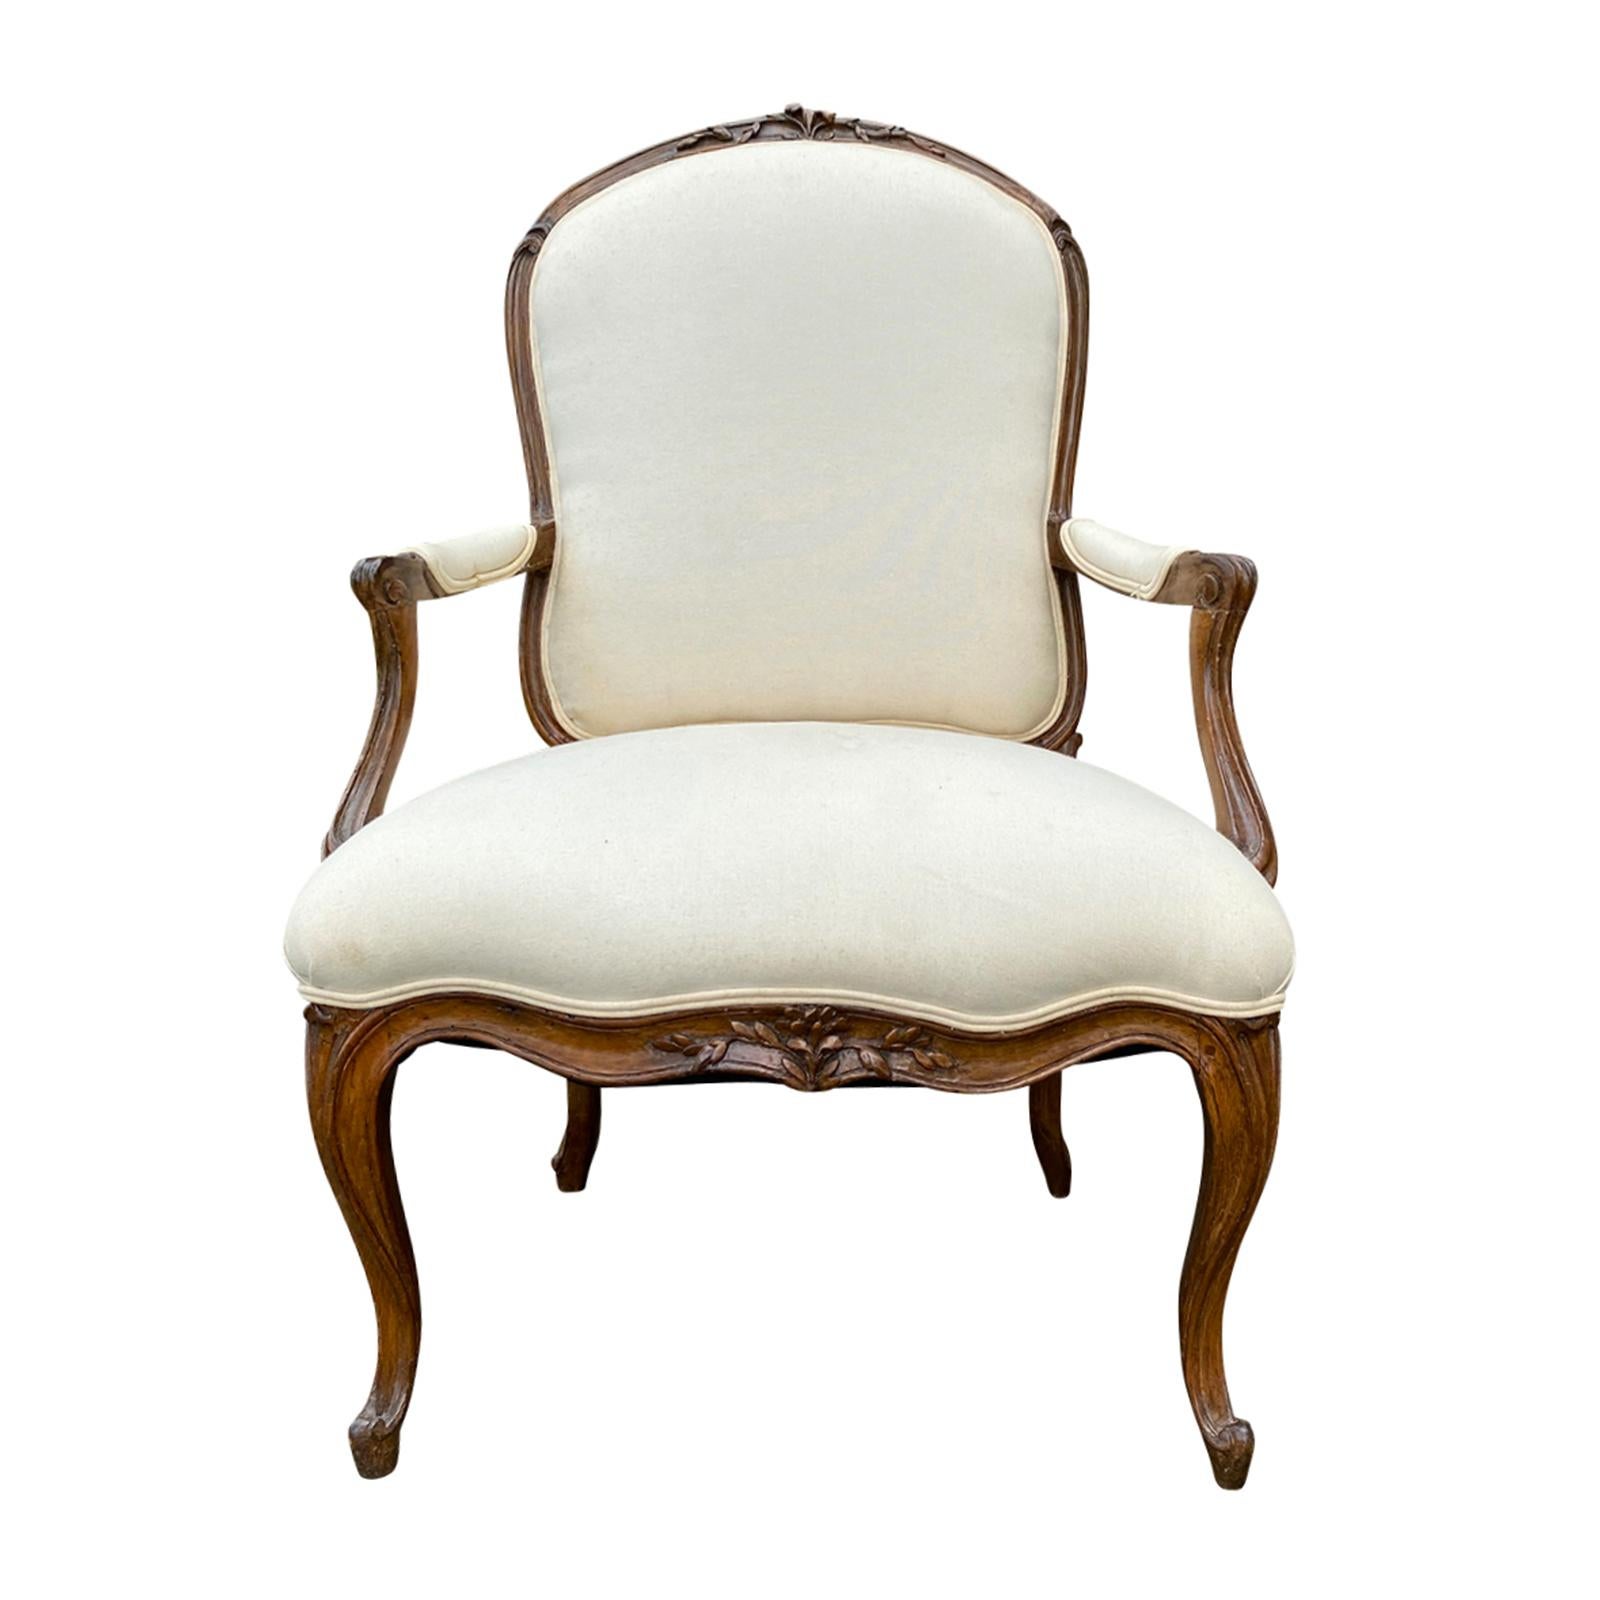 19th Century French Louis XV Style Armchair from the Baker Furniture Archive